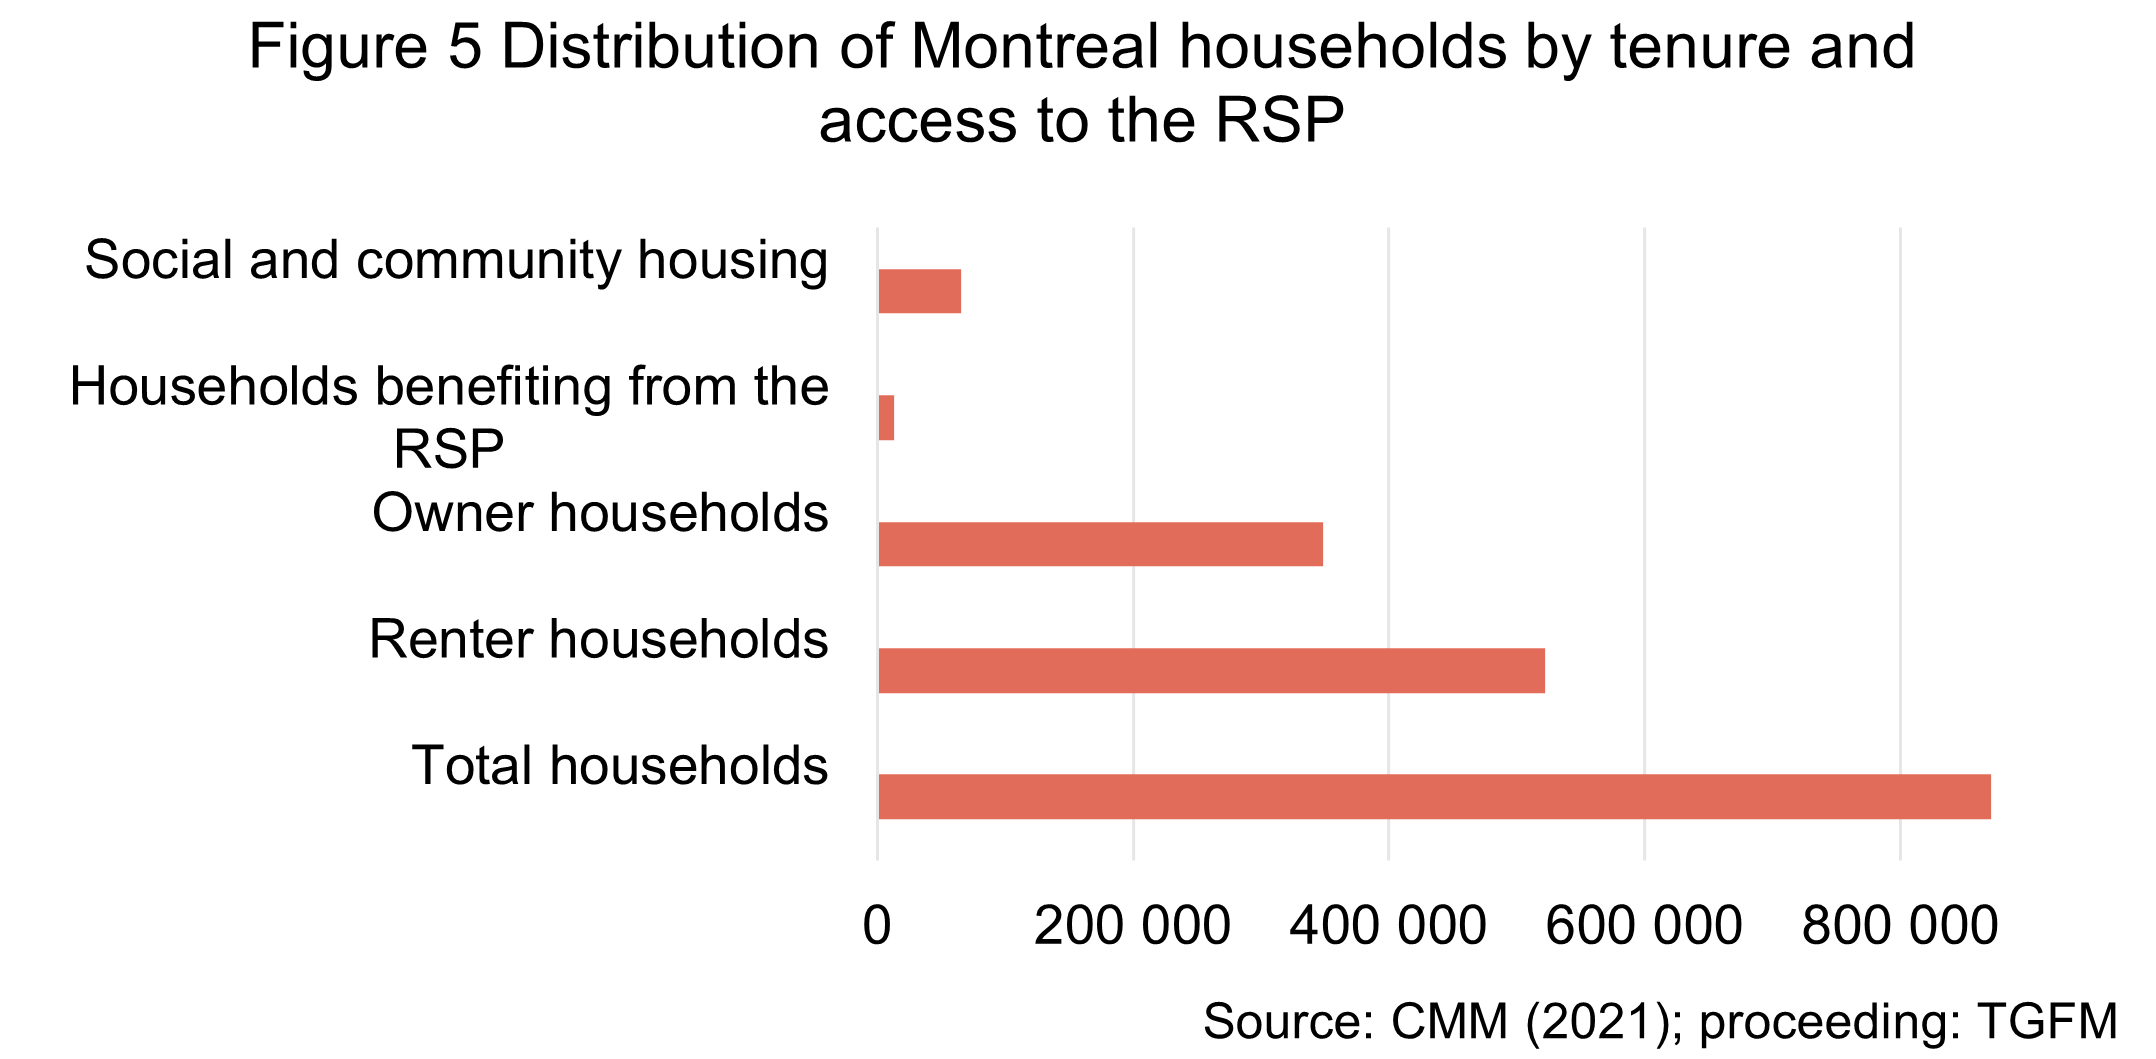 The figure illustrates the marginal place that social and community housing occupies within the Montreal housing stock. 